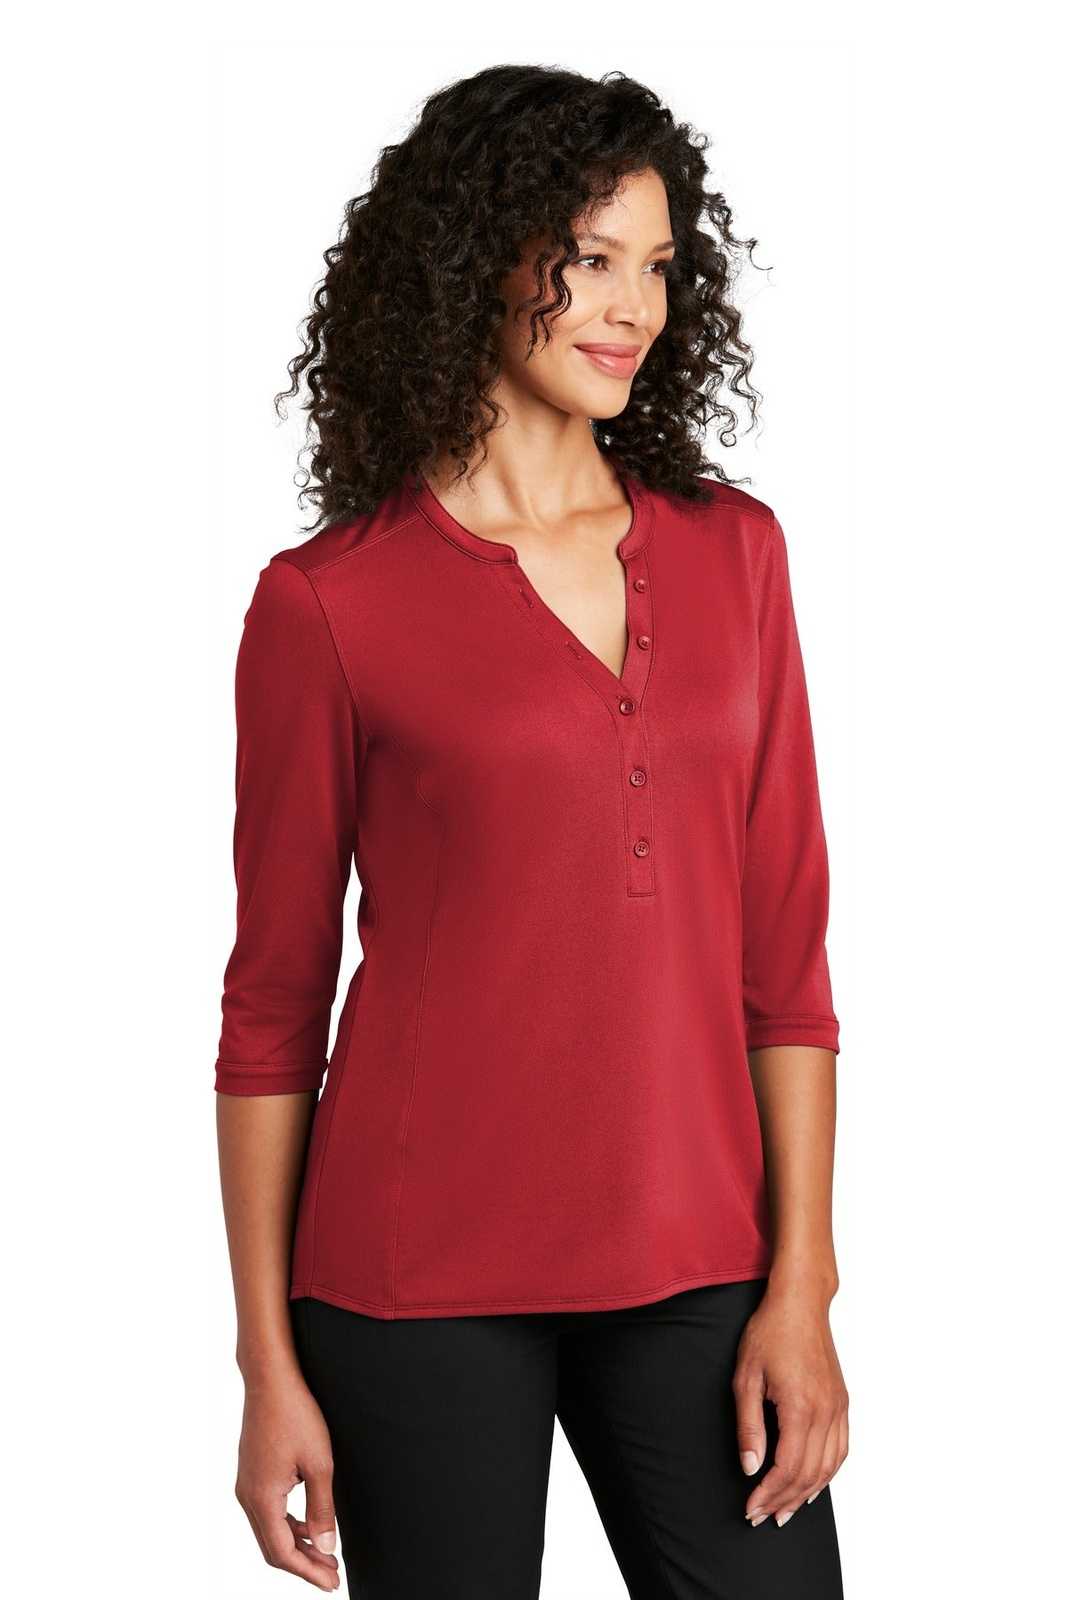 Port Authority LK750 Ladies UV Choice Pique Henley - Rich Red - HIT a Double - 4